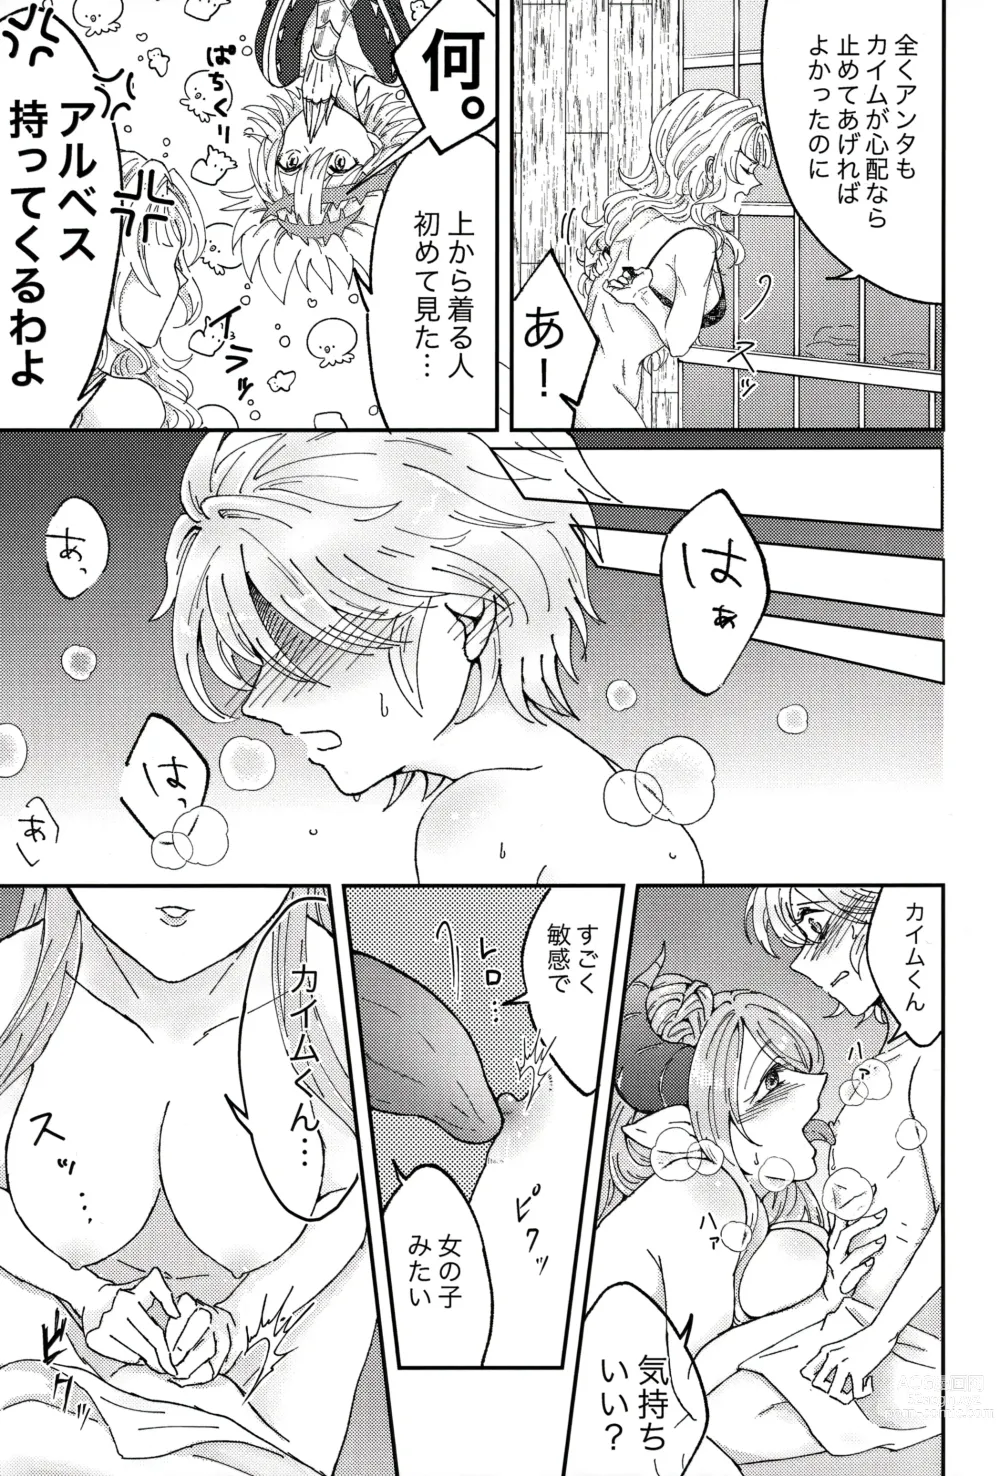 Page 6 of doujinshi SOAP TRICK!